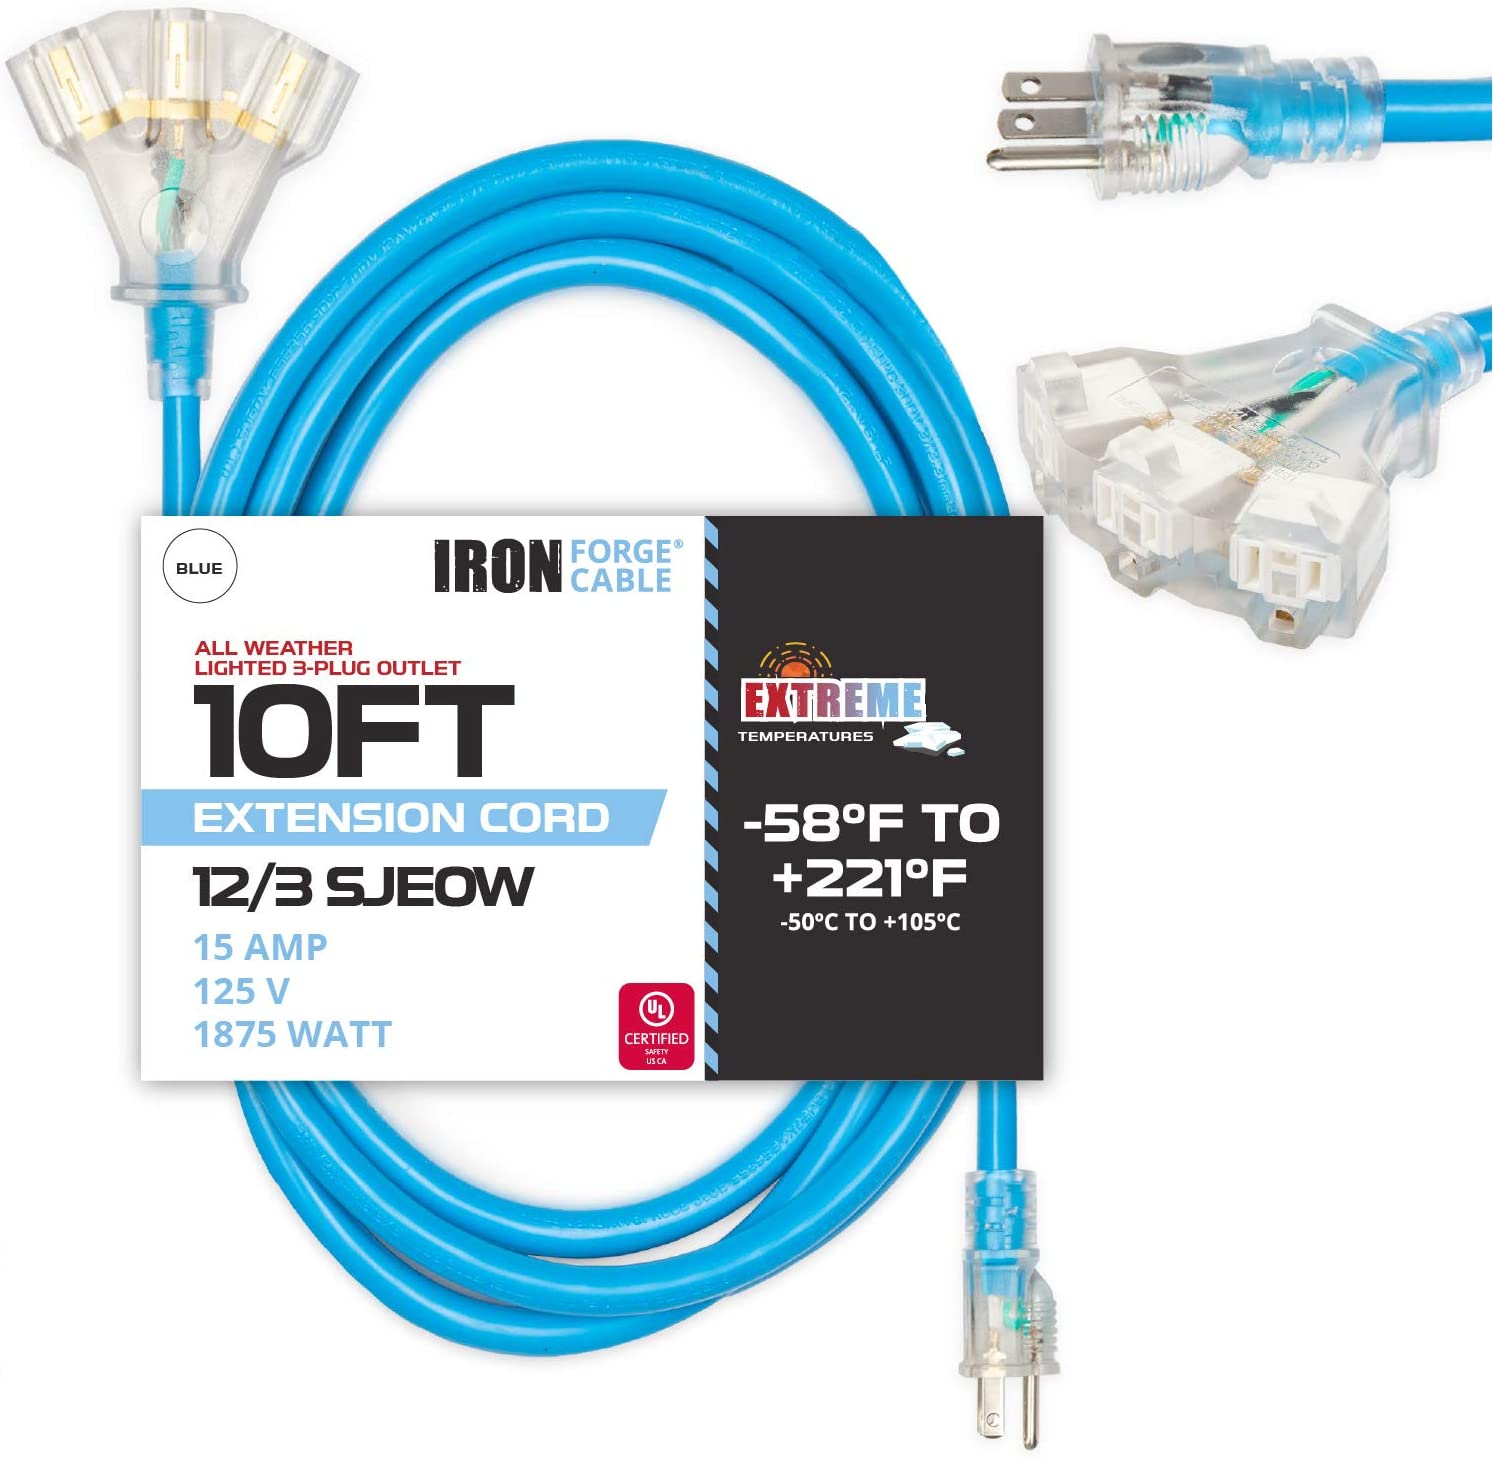 10 Ft All Weather Extension Cord- 12 Gauge- Blue